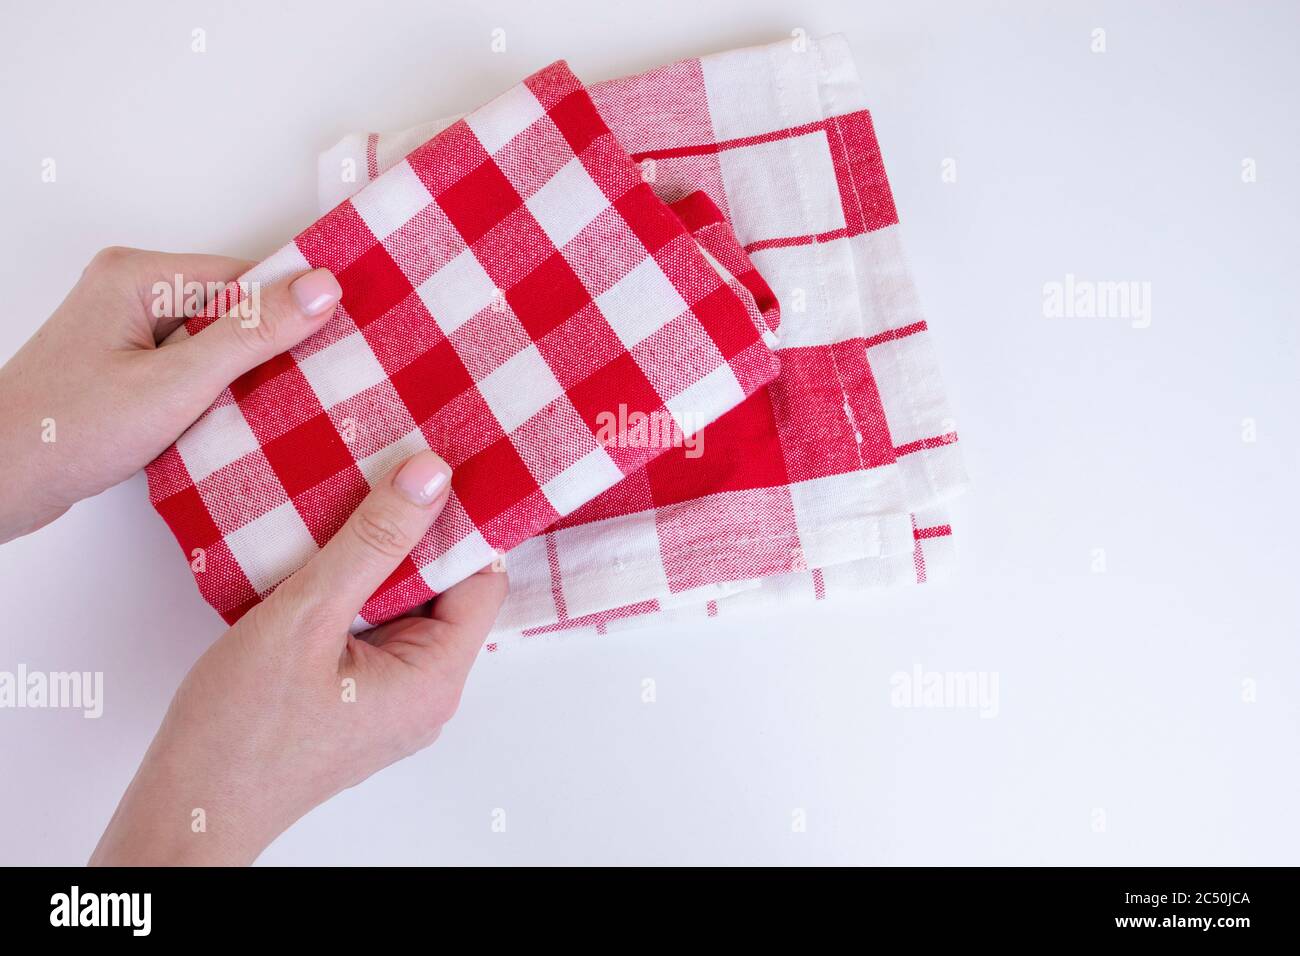 Woman hands holding red checkered kitchen towels. Two folded red and white tablecloth in female hands. Stock Photo